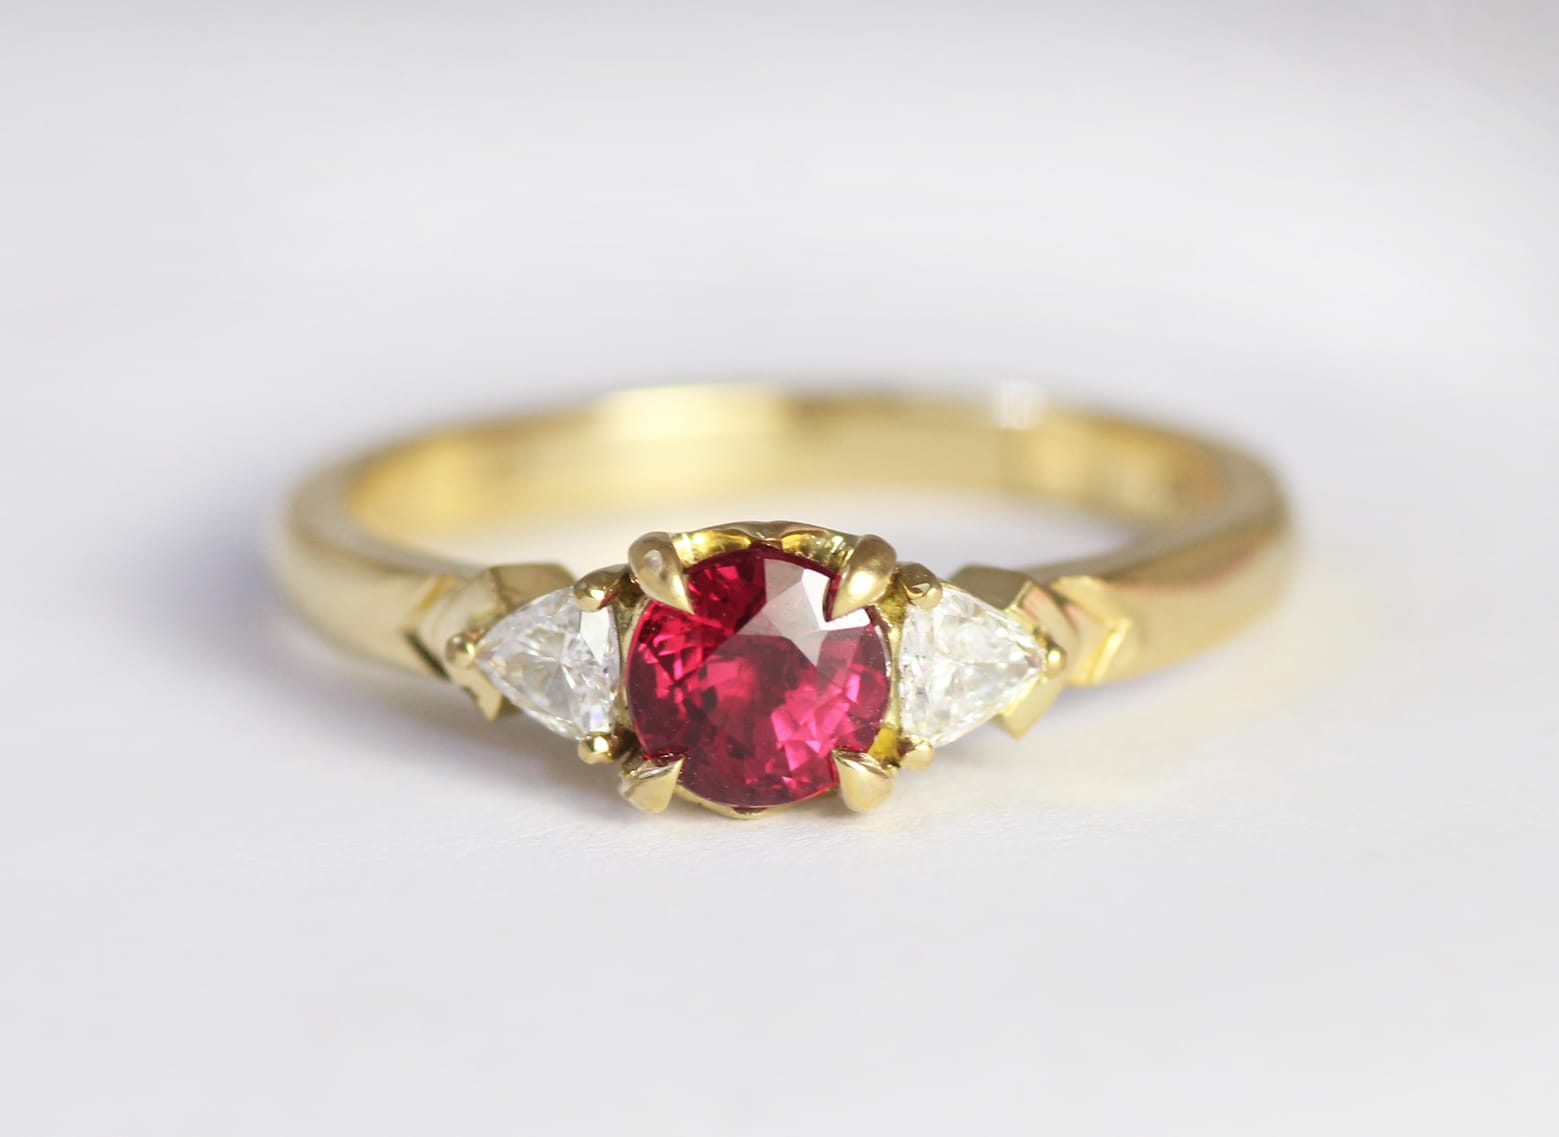 18ct Fairtrade gold with ruby and diamonds by Zoe Pook Jewellery